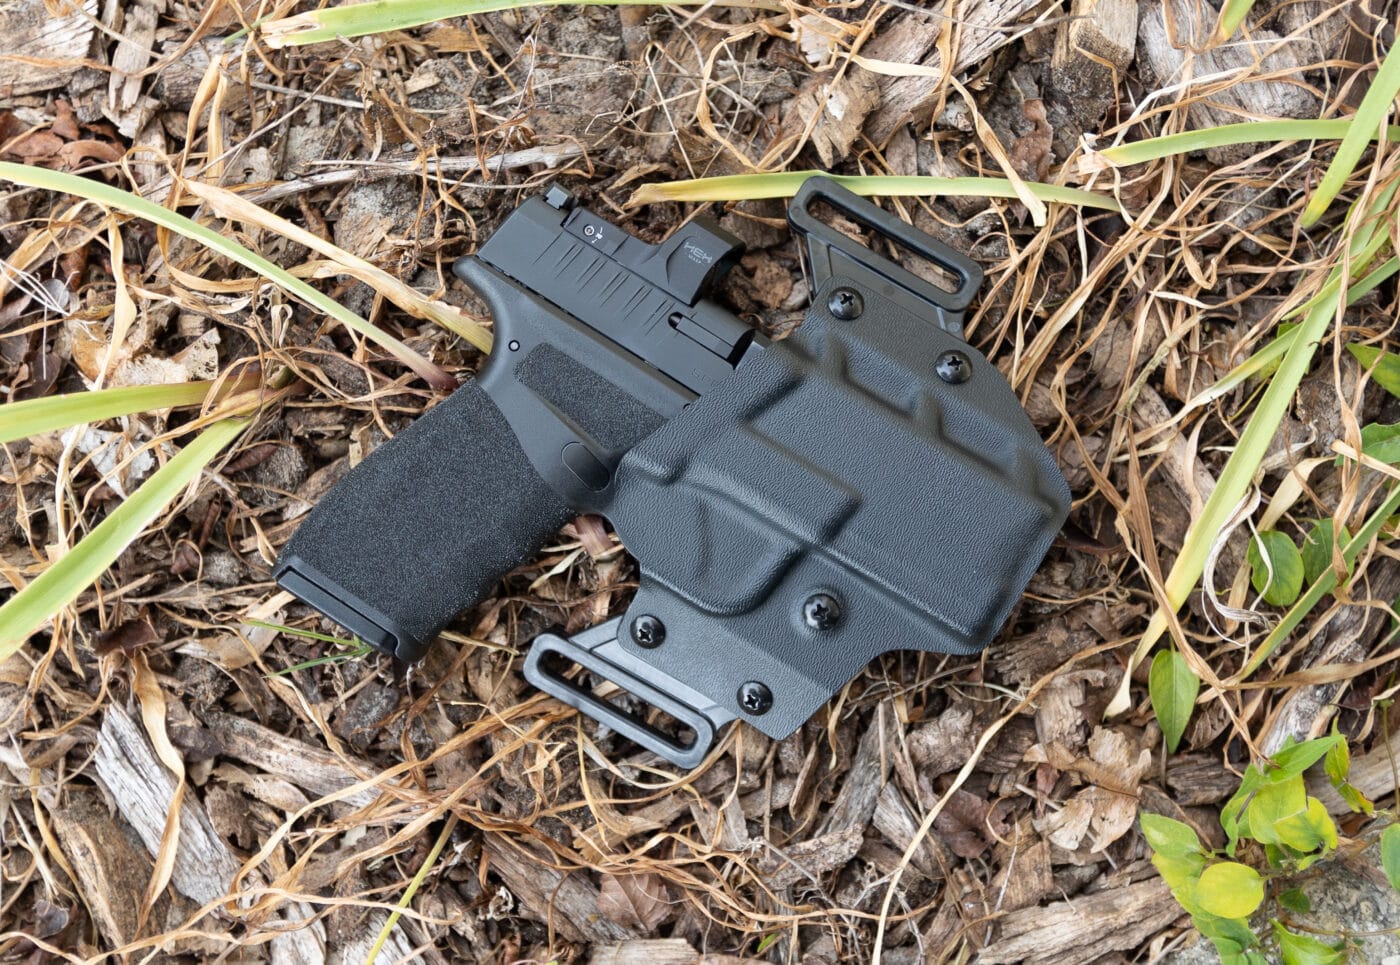 Crucial Concealment Covert OWB Holster for the Hellcat Pro with pistol holstered inside